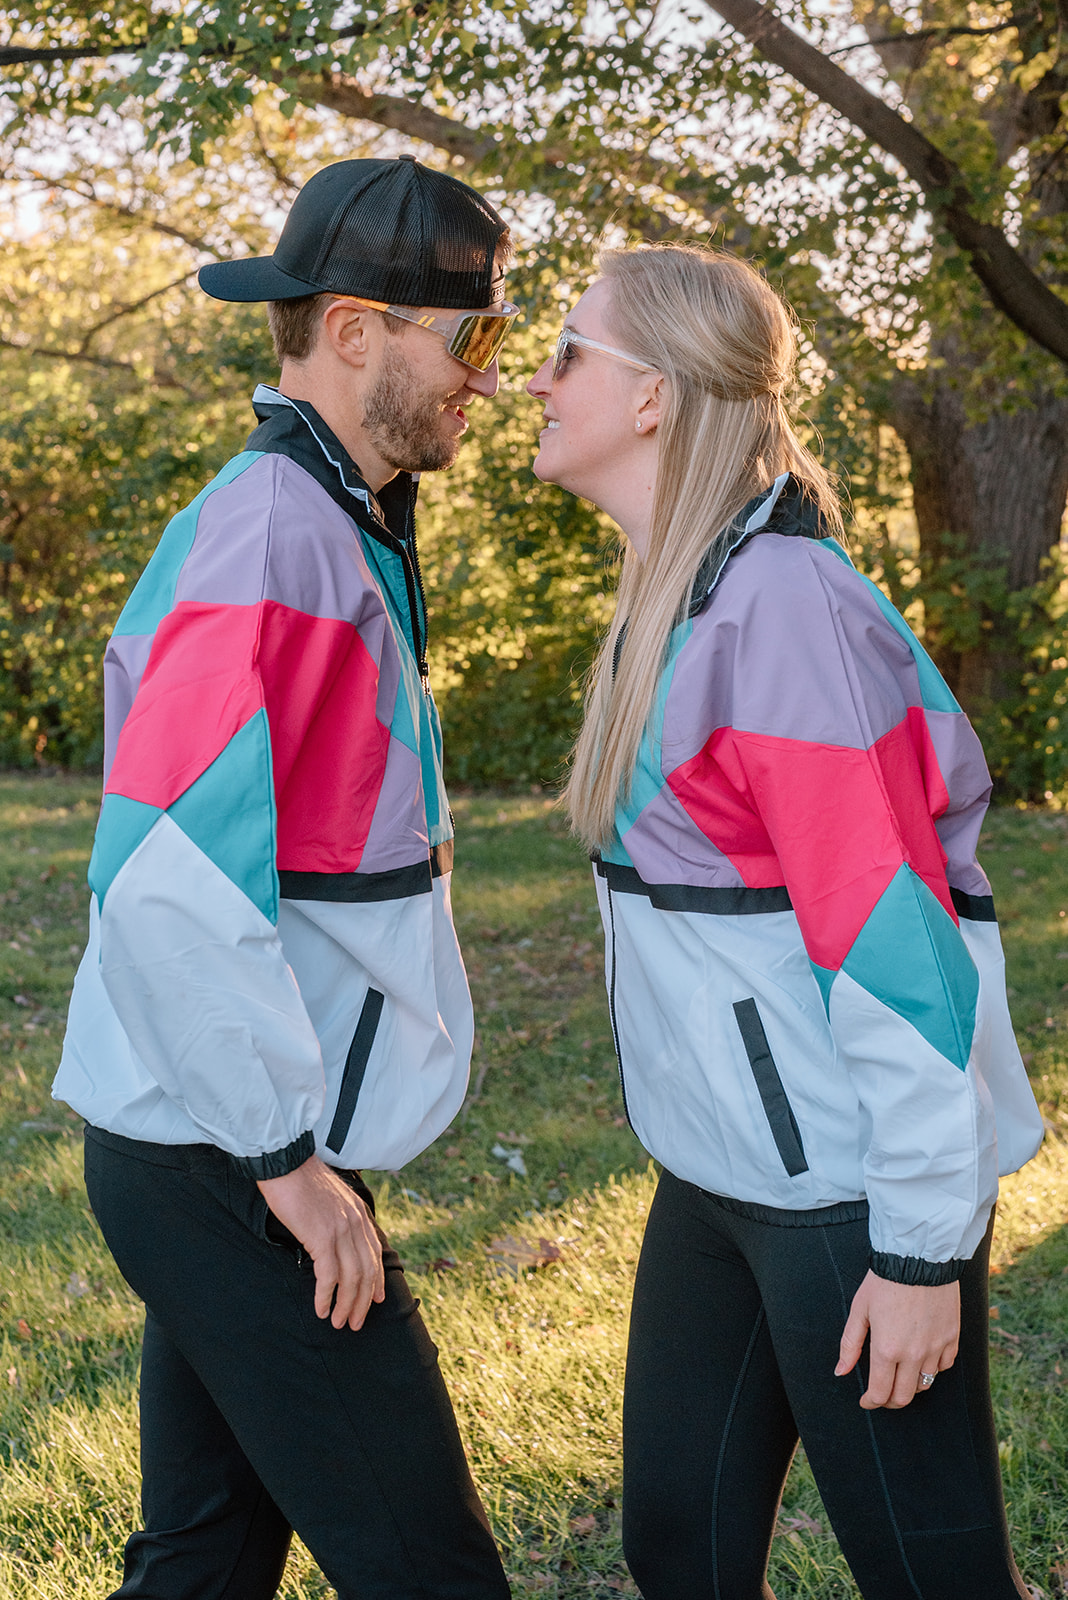 Silly engagement photos in windbreakers